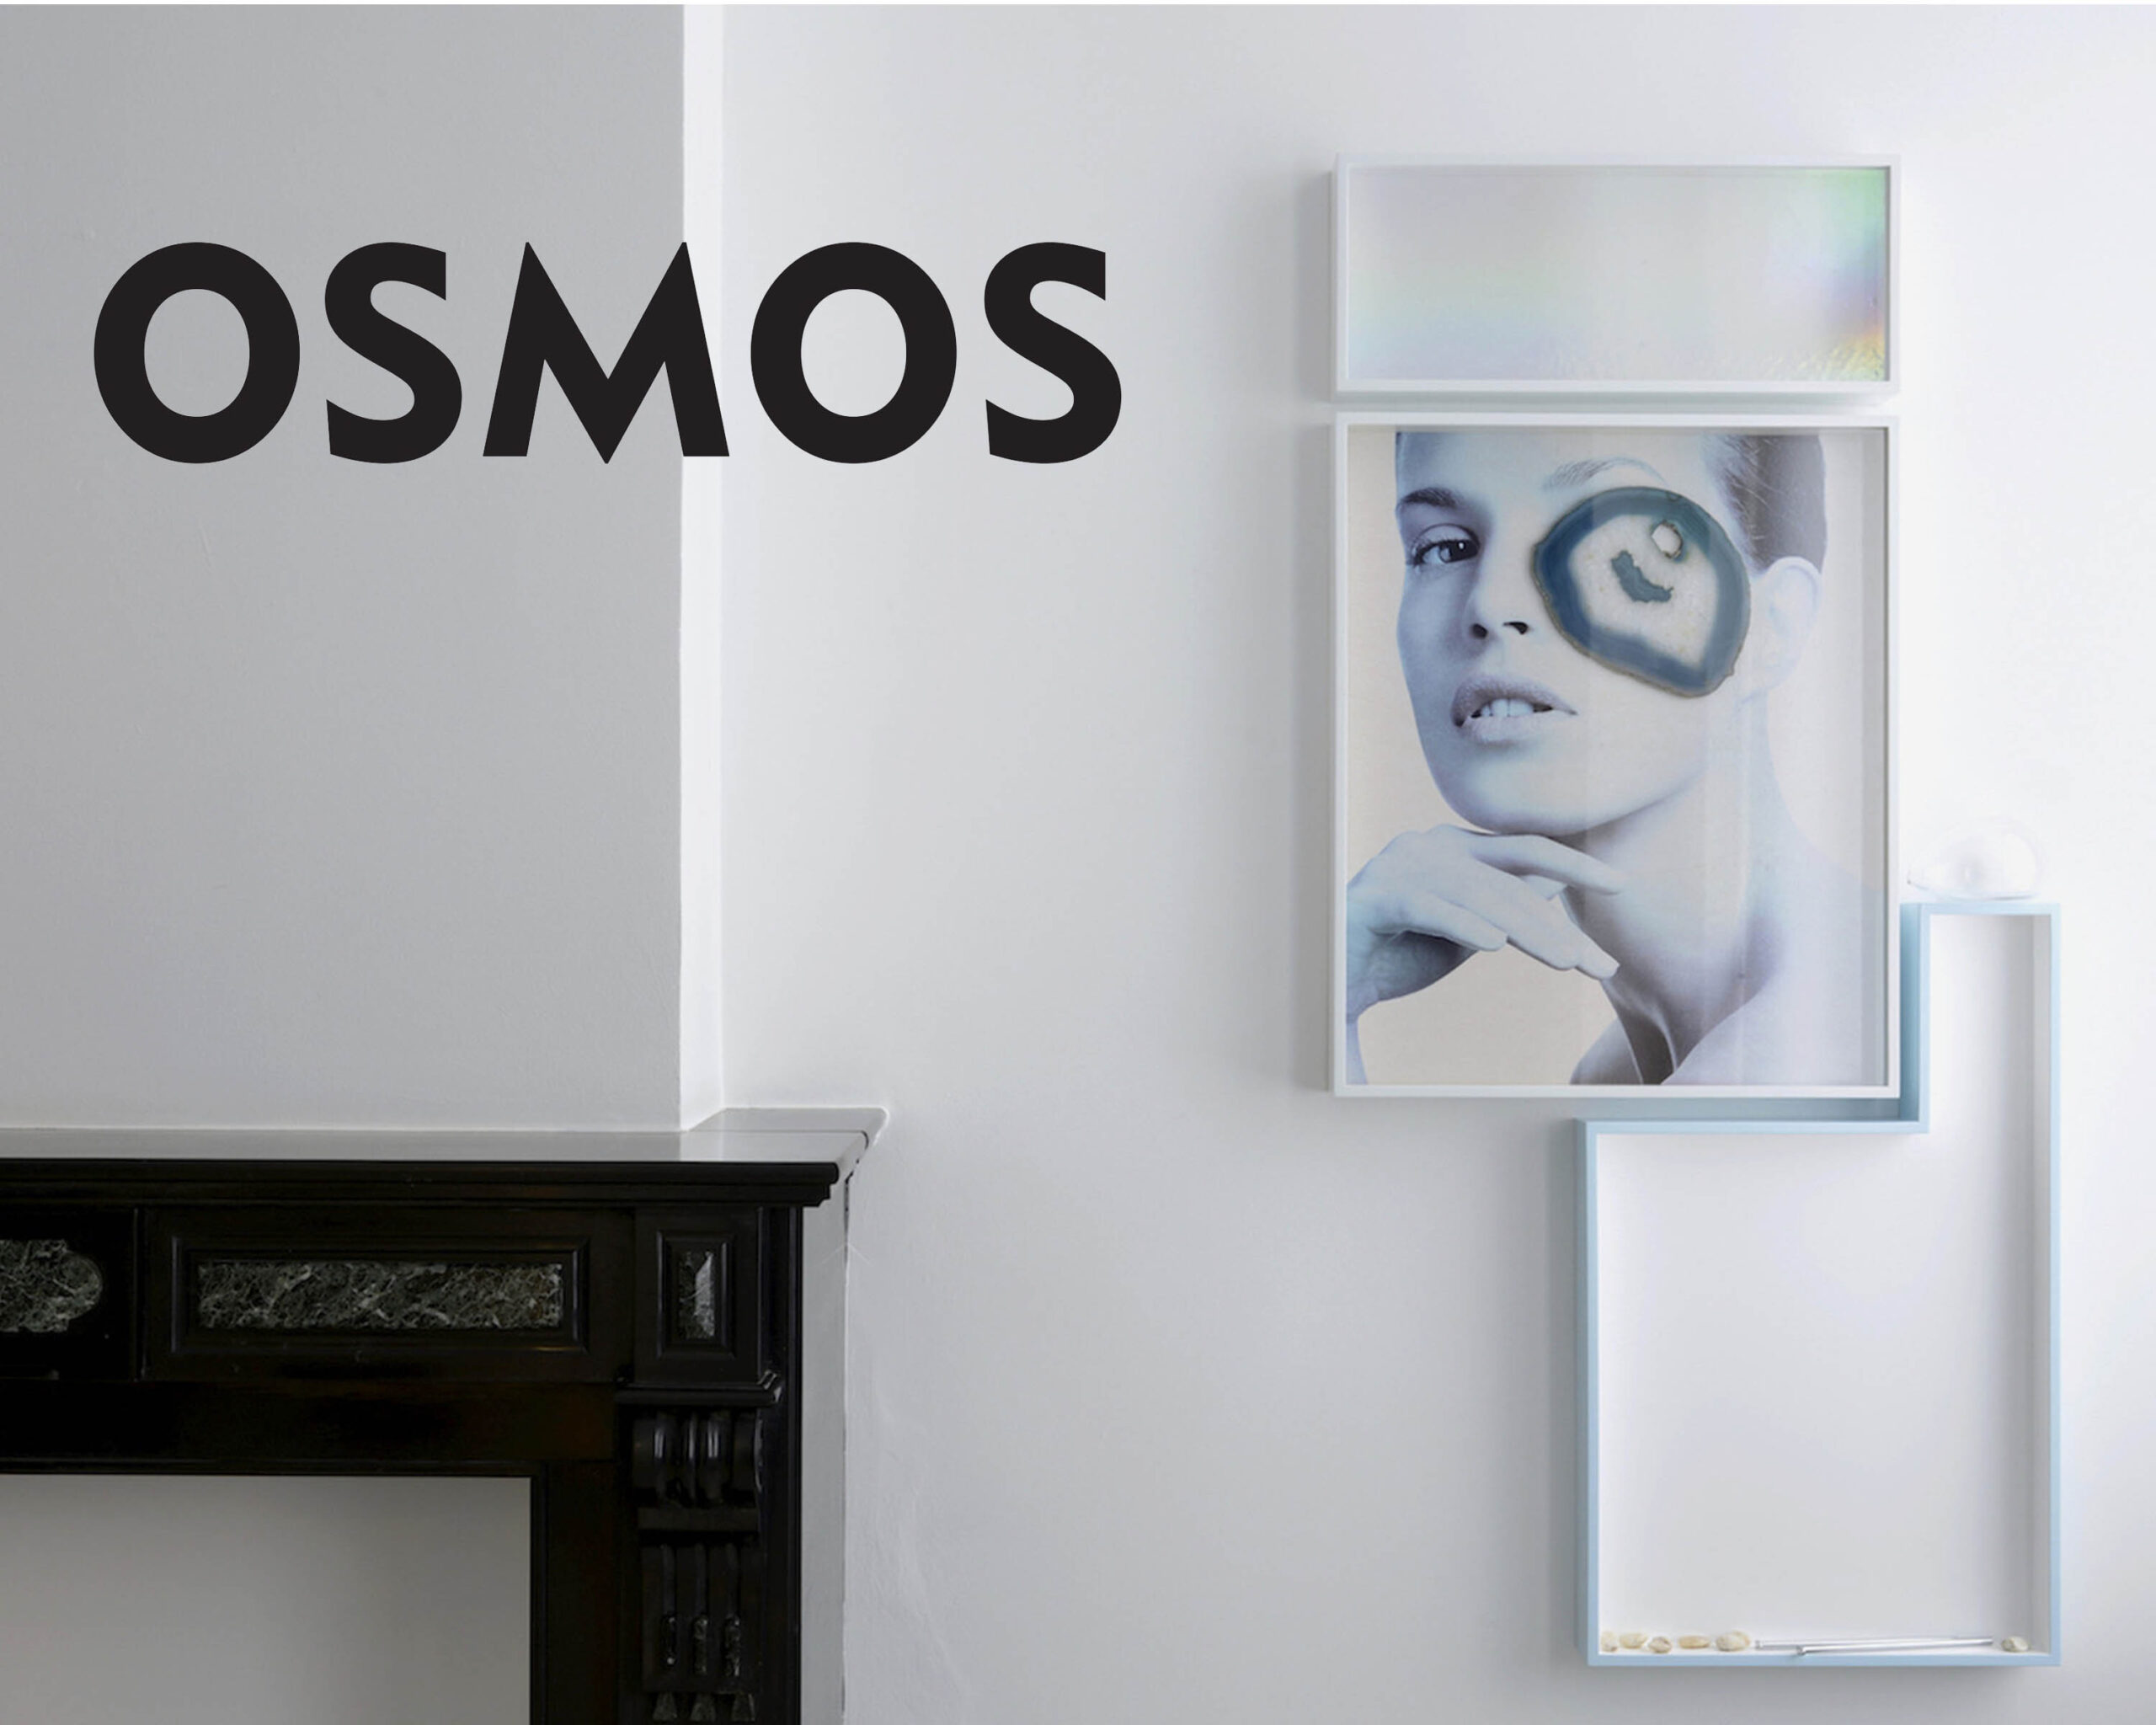 Osmos Magazine, 2015 | Things Display Themselves